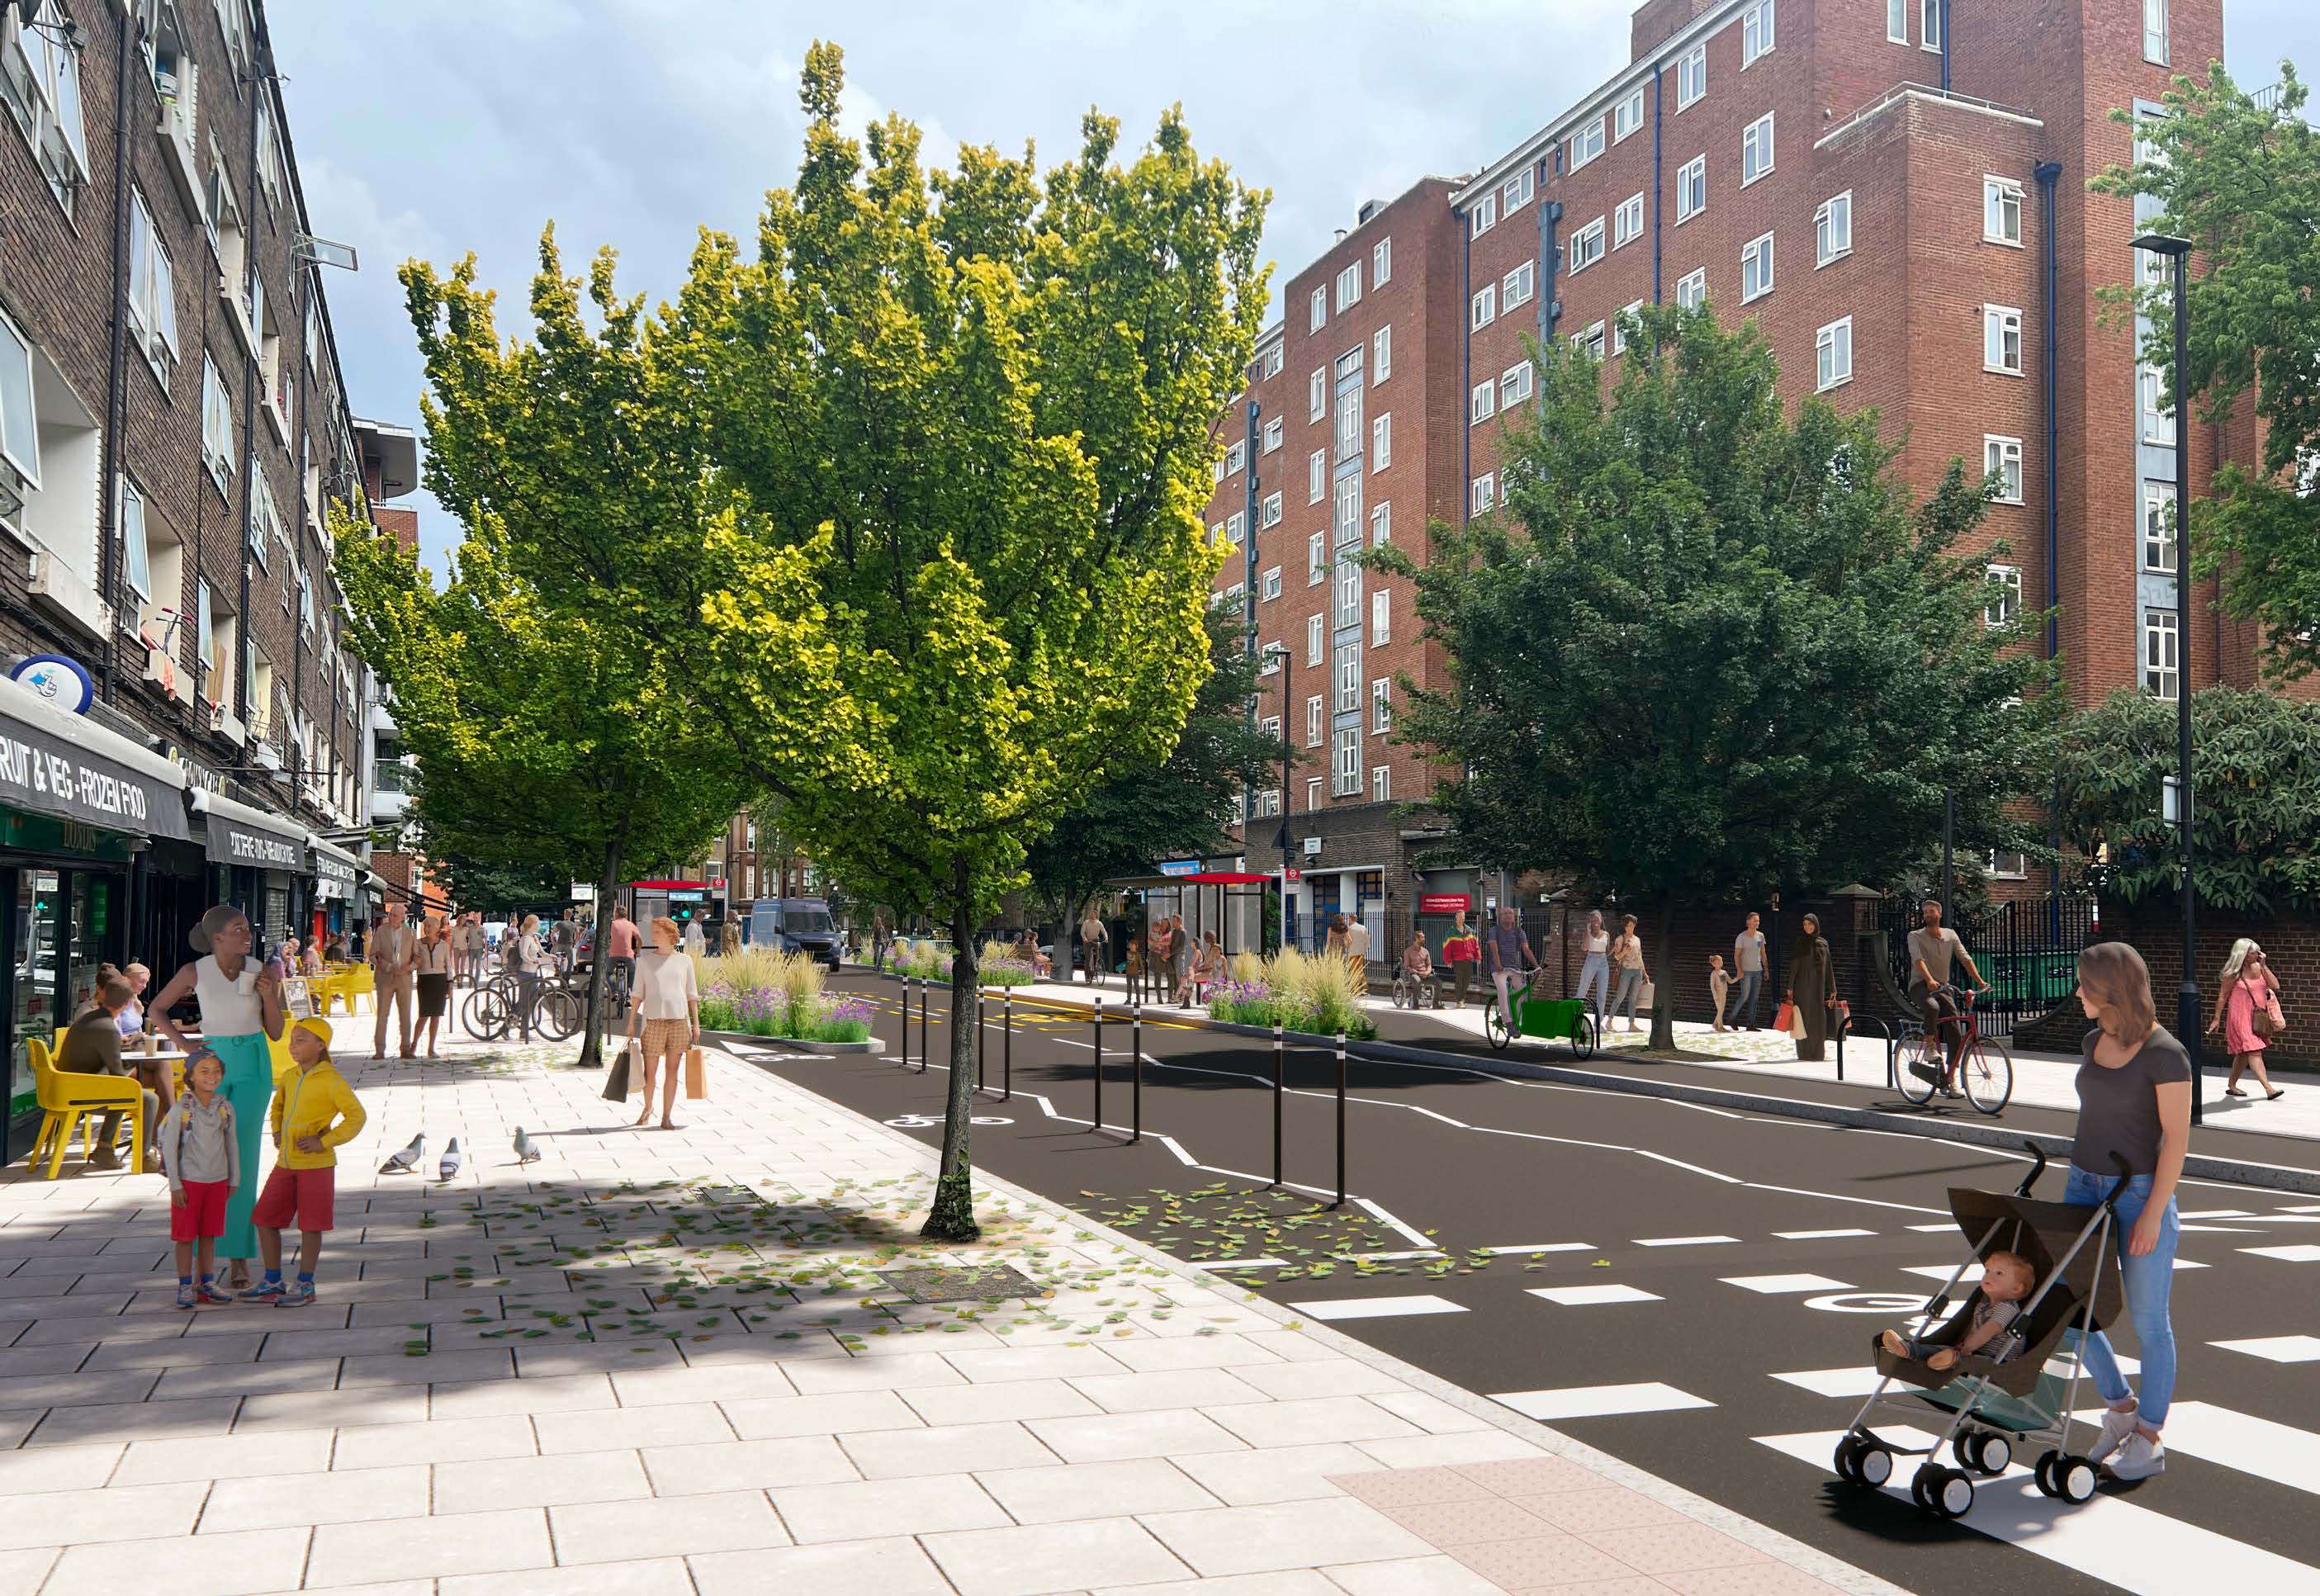 Visualisation of the project proposals with trees, wide pavements and a zebra crossing